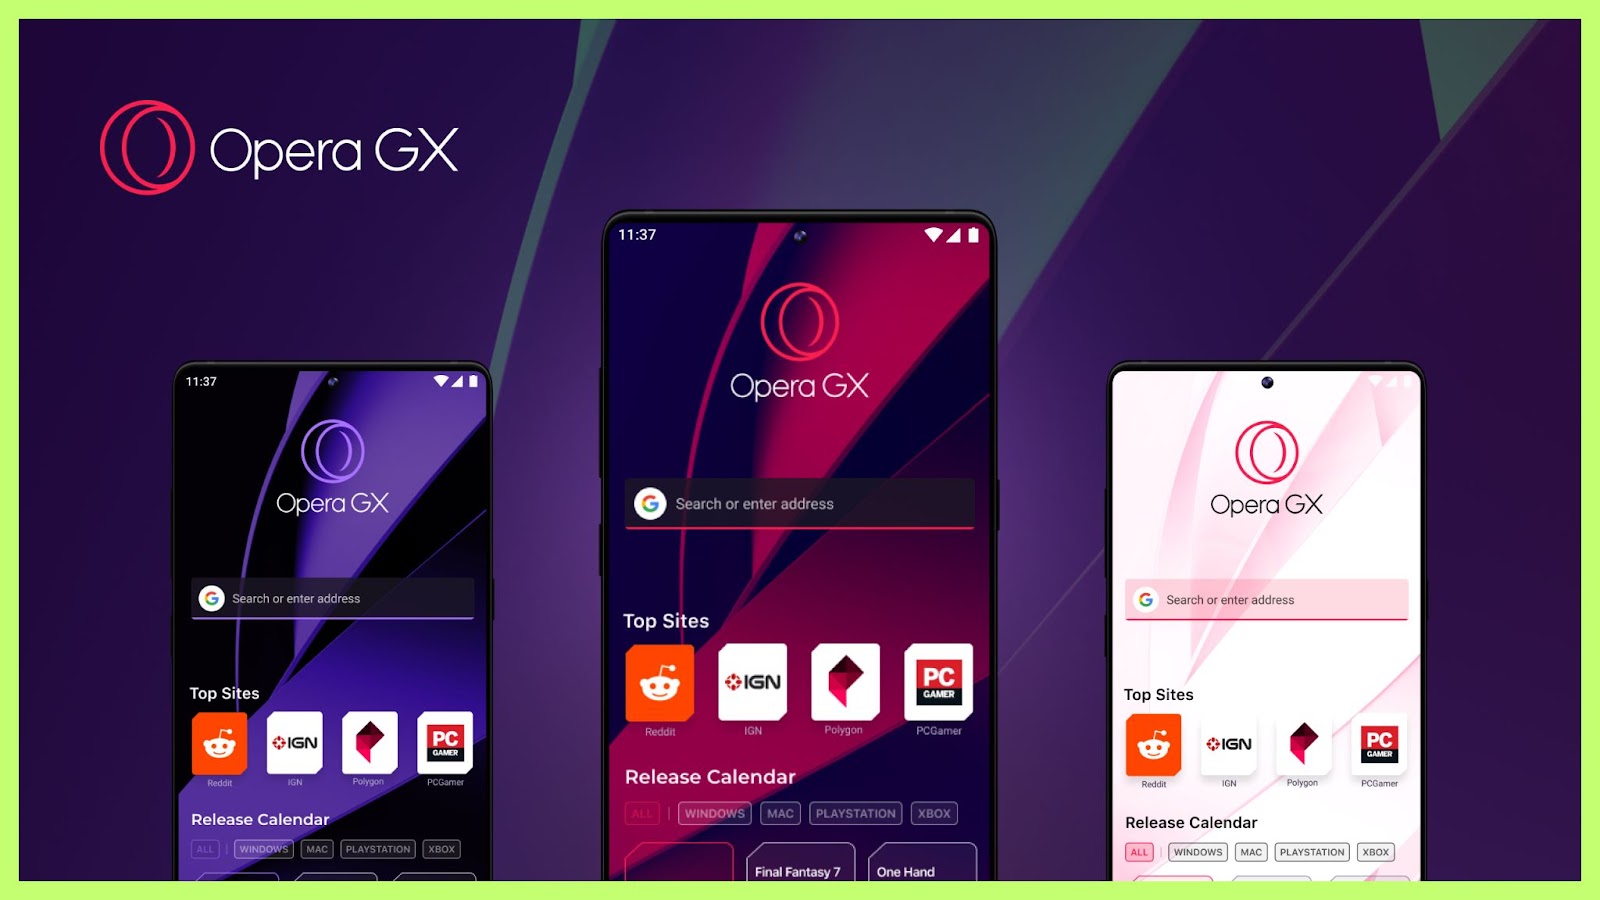 Opera GX Mobile Beta Launched as 'World's First Mobile Browser for